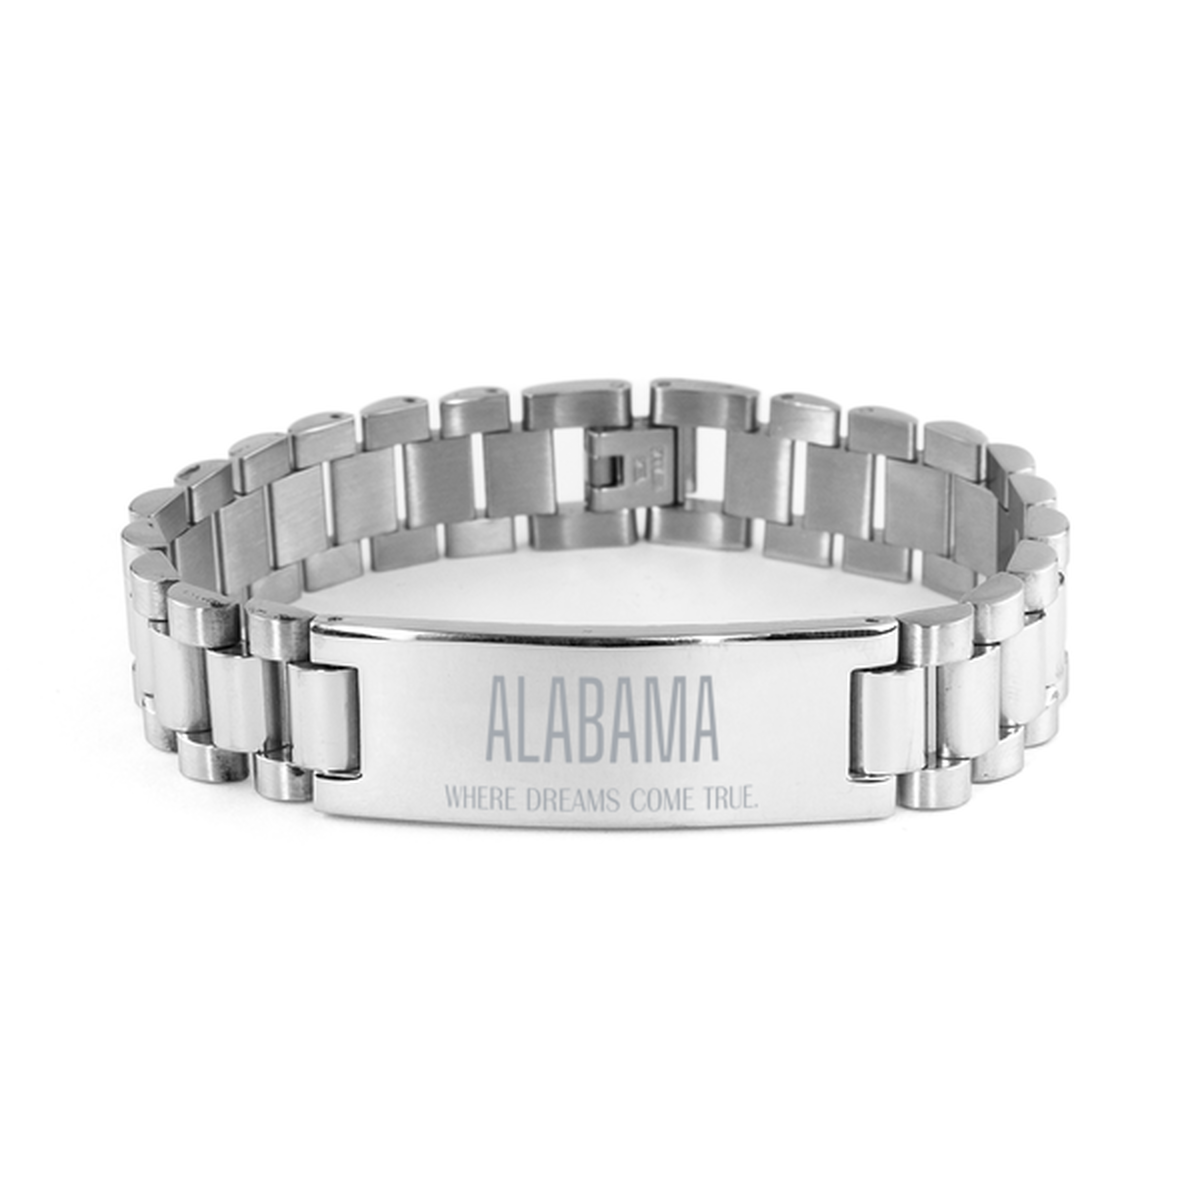 Love Alabama State Ladder Stainless Steel Bracelet, Alabama Where dreams come true, Birthday Inspirational Gifts For Alabama Men, Women, Friends